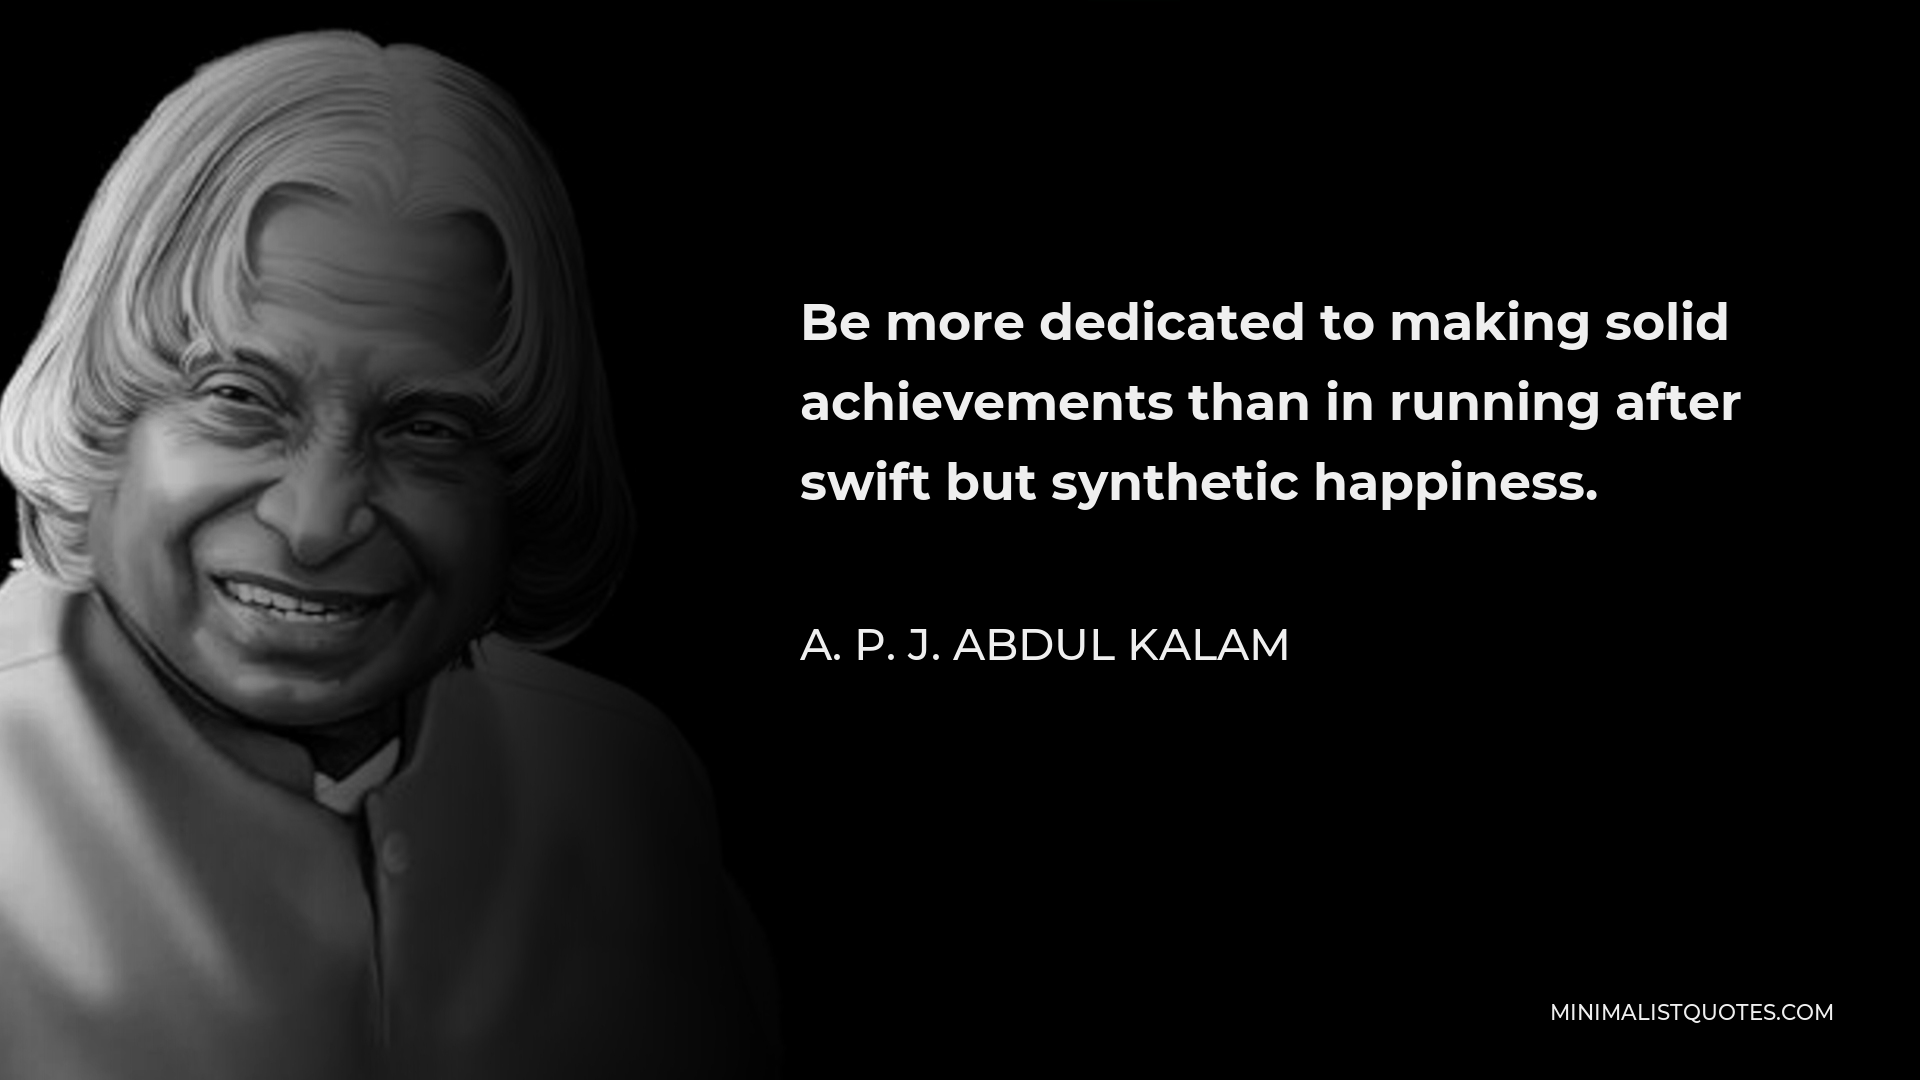 A. P. J. Abdul Kalam Quote - Be more dedicated to making solid achievements than in running after swift but synthetic happiness.